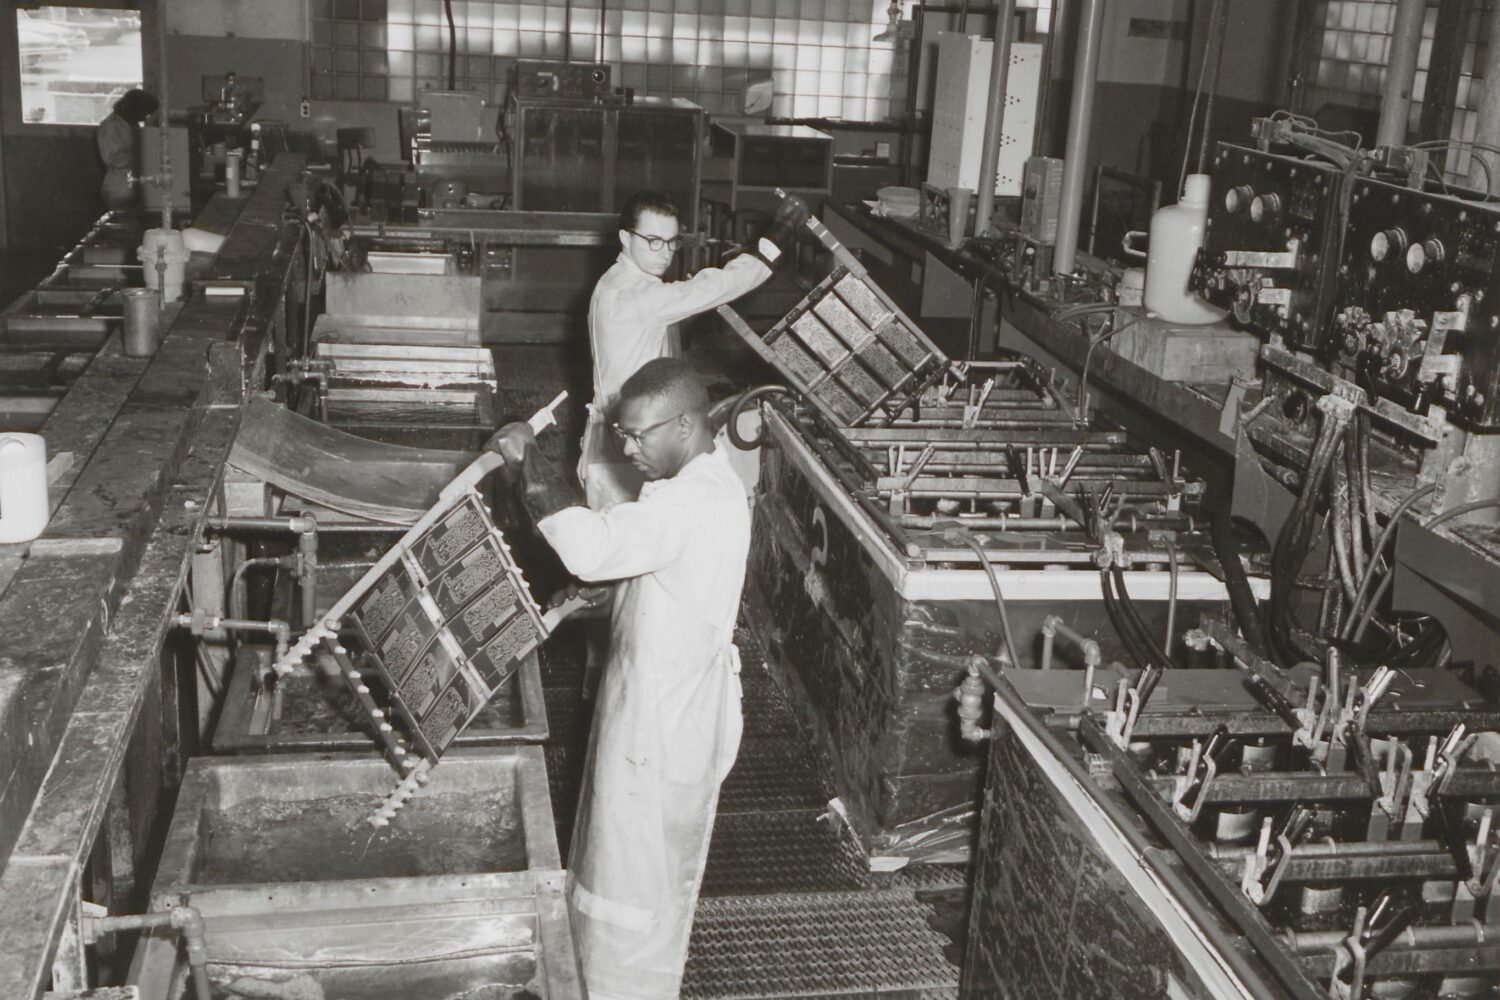 Two HP employees in Palo Alto dip-soldering circuits in the Palo Alto production facility in the 1950s.